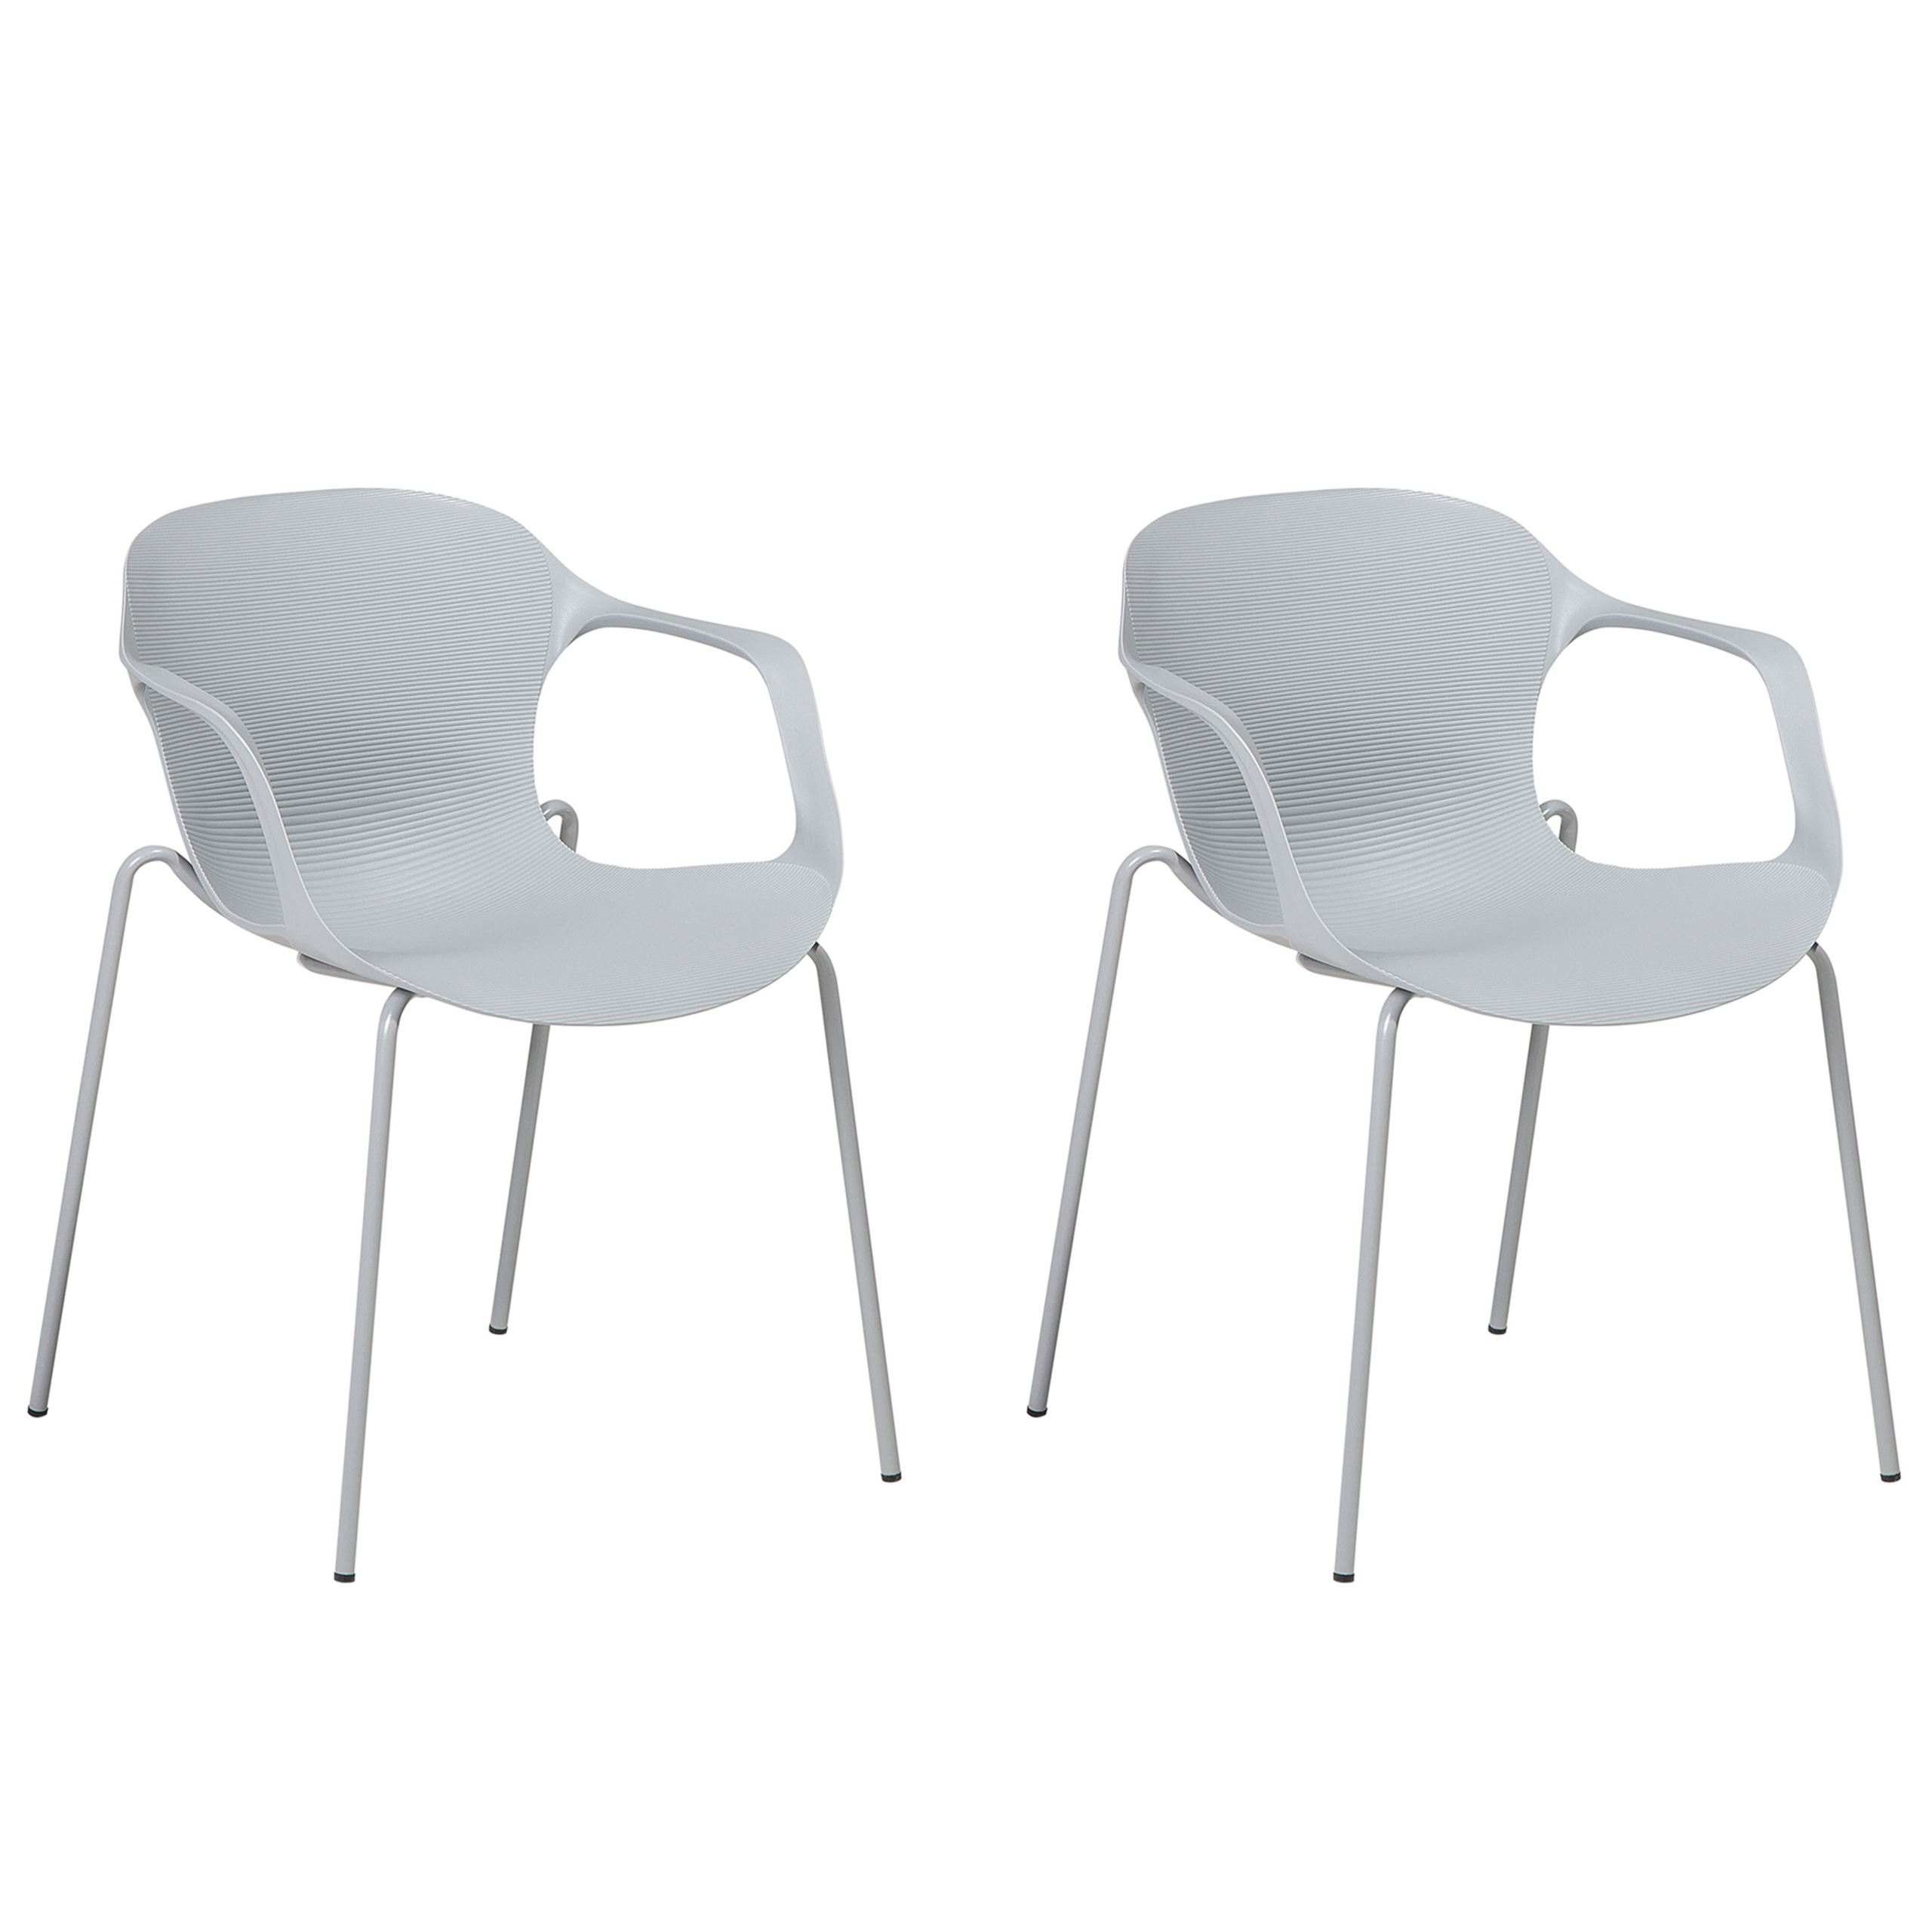 Beliani Set of 2 dining Chairs Grey Metal Legs Modern Industrial Style Kitchen Office